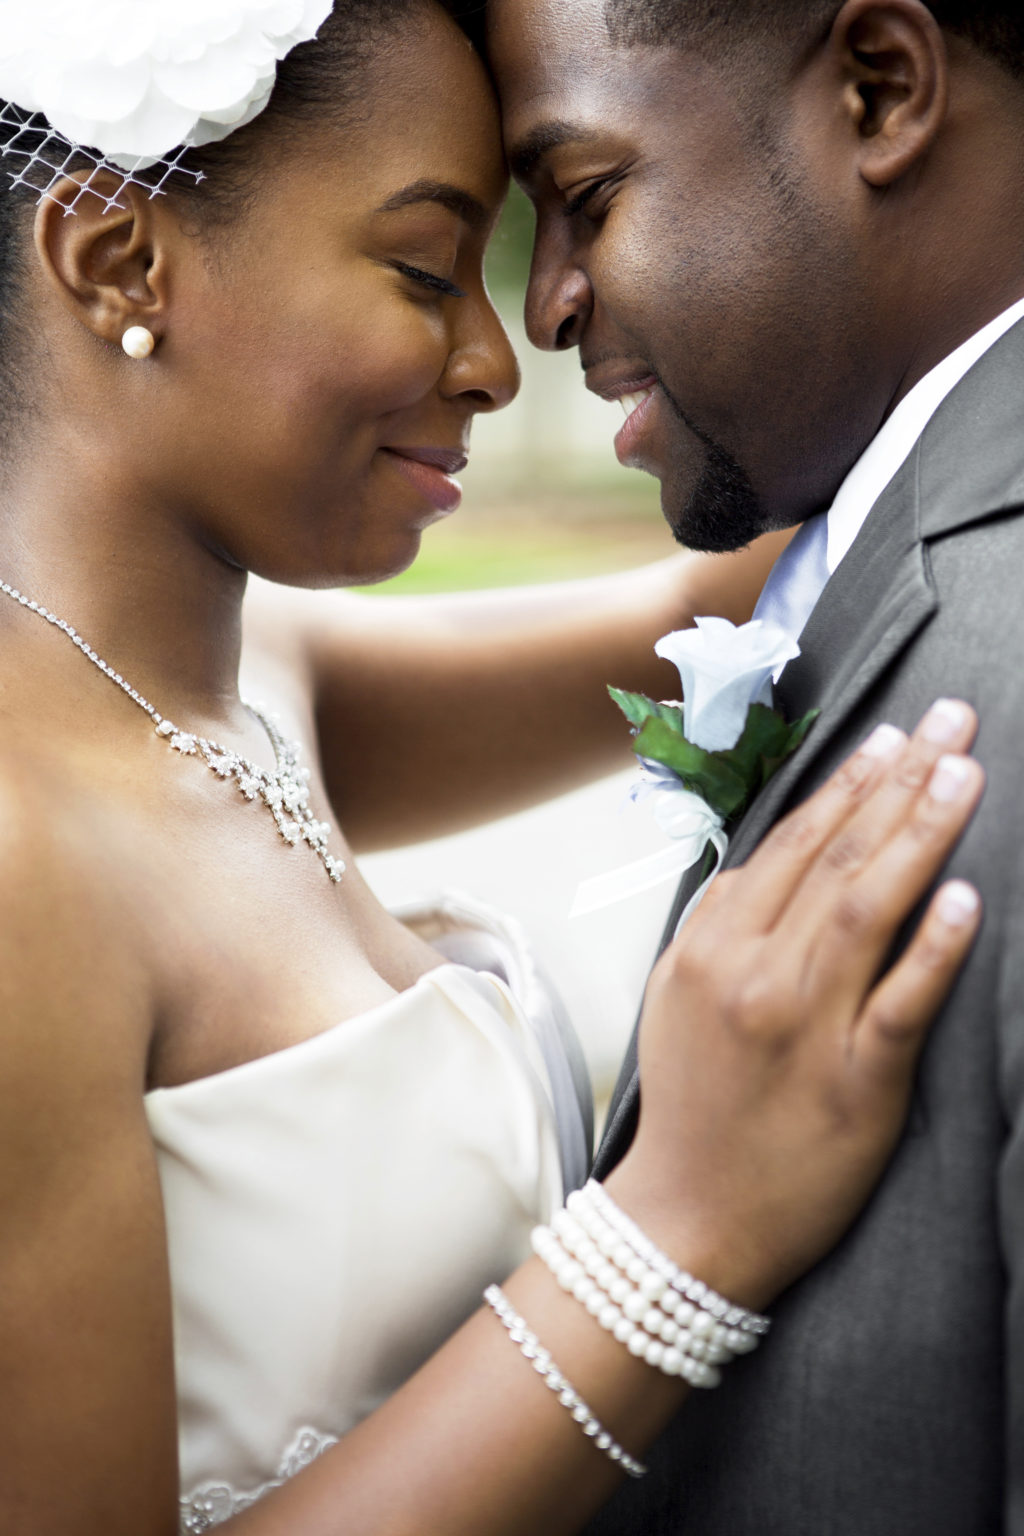 Newlyweds touching foreheads and smiling